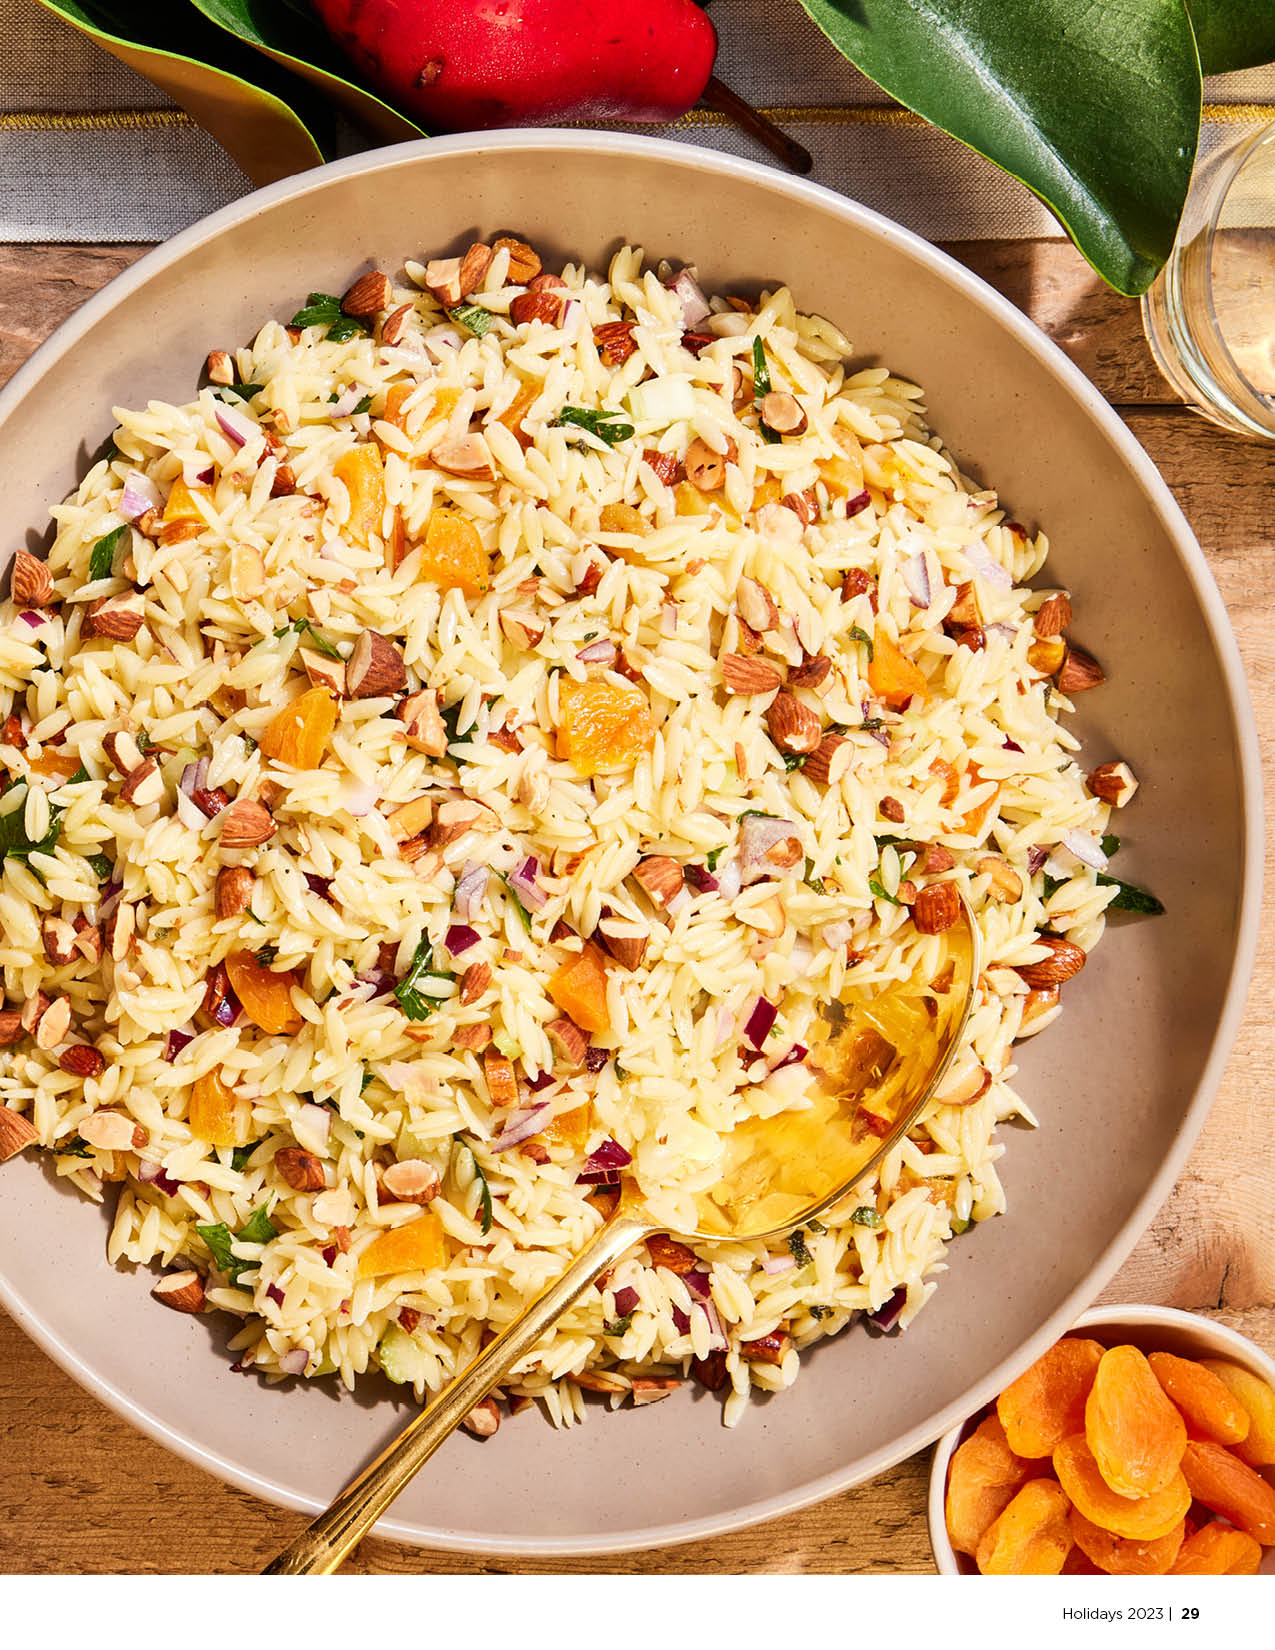 Orzo salad with dried apricots and almonds sitting on a wooden table in a brown bowl.